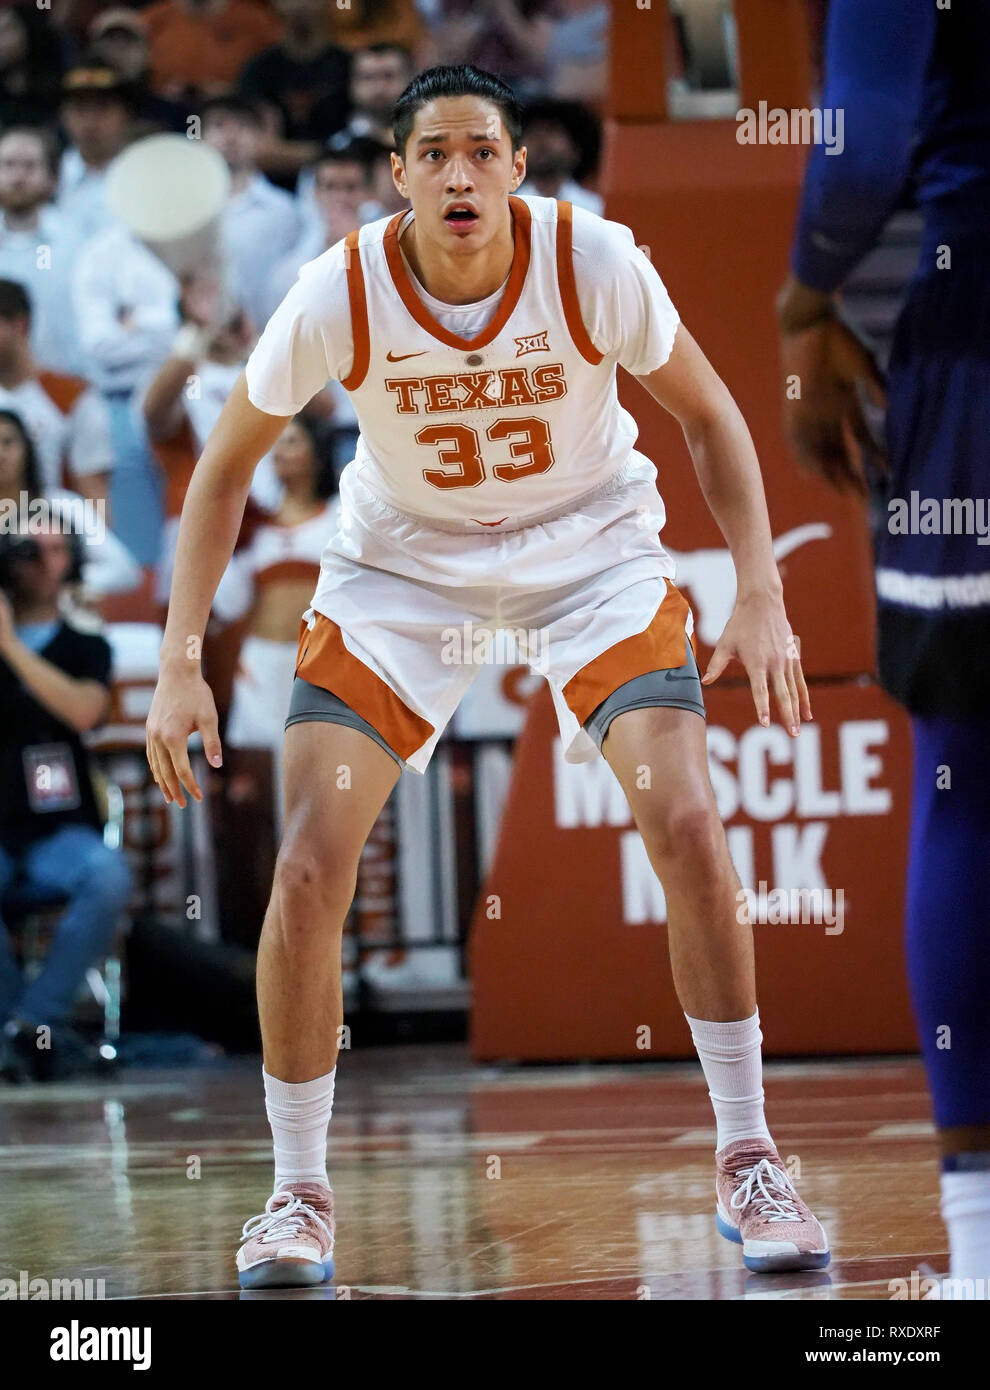 March 9, 2019. Kamaka Hepa #33 of the Texas Longhorns in action vs the TCU Horned Frogs at the Frank Erwin Center in Austin Texas. TCU beats Texas 69-54.Robert Backman/Cal Sport Media. Stock Photo